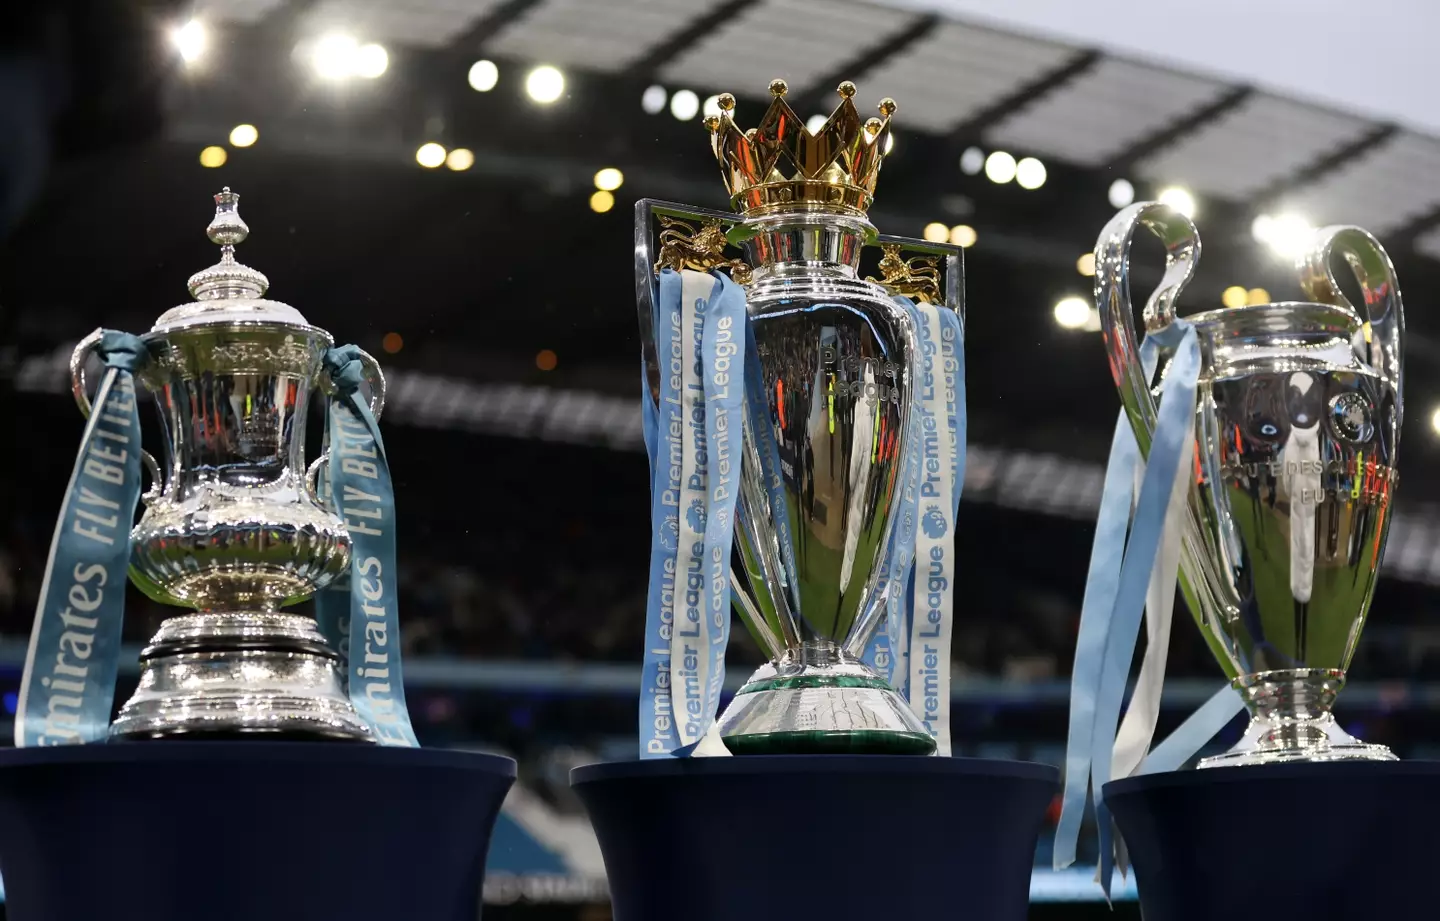 Manchester City are the current FA Cup holders. (Image